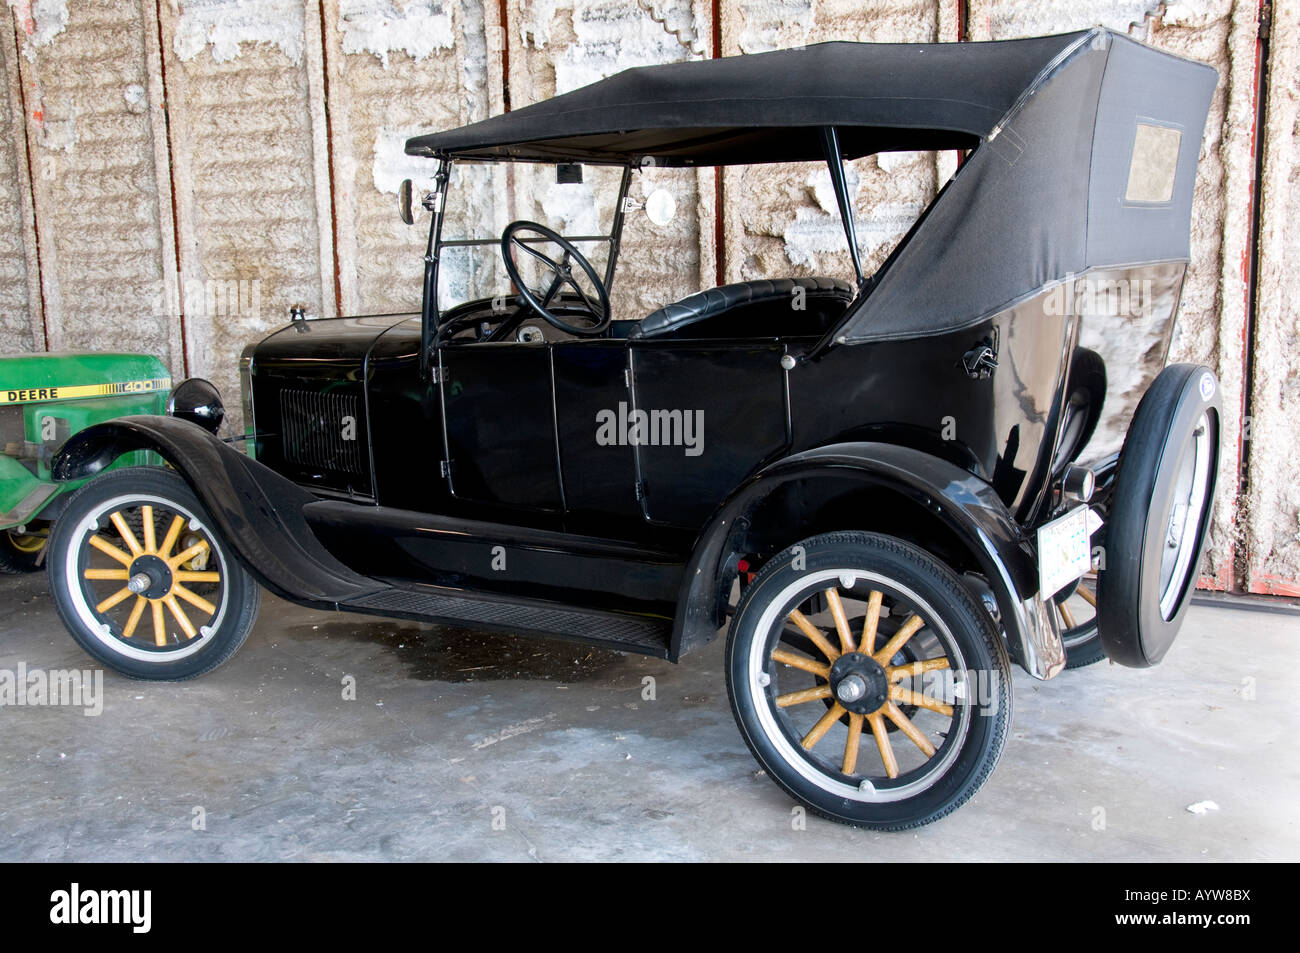 A 1928 Model T Ford 4-door touring car. Stock Photo